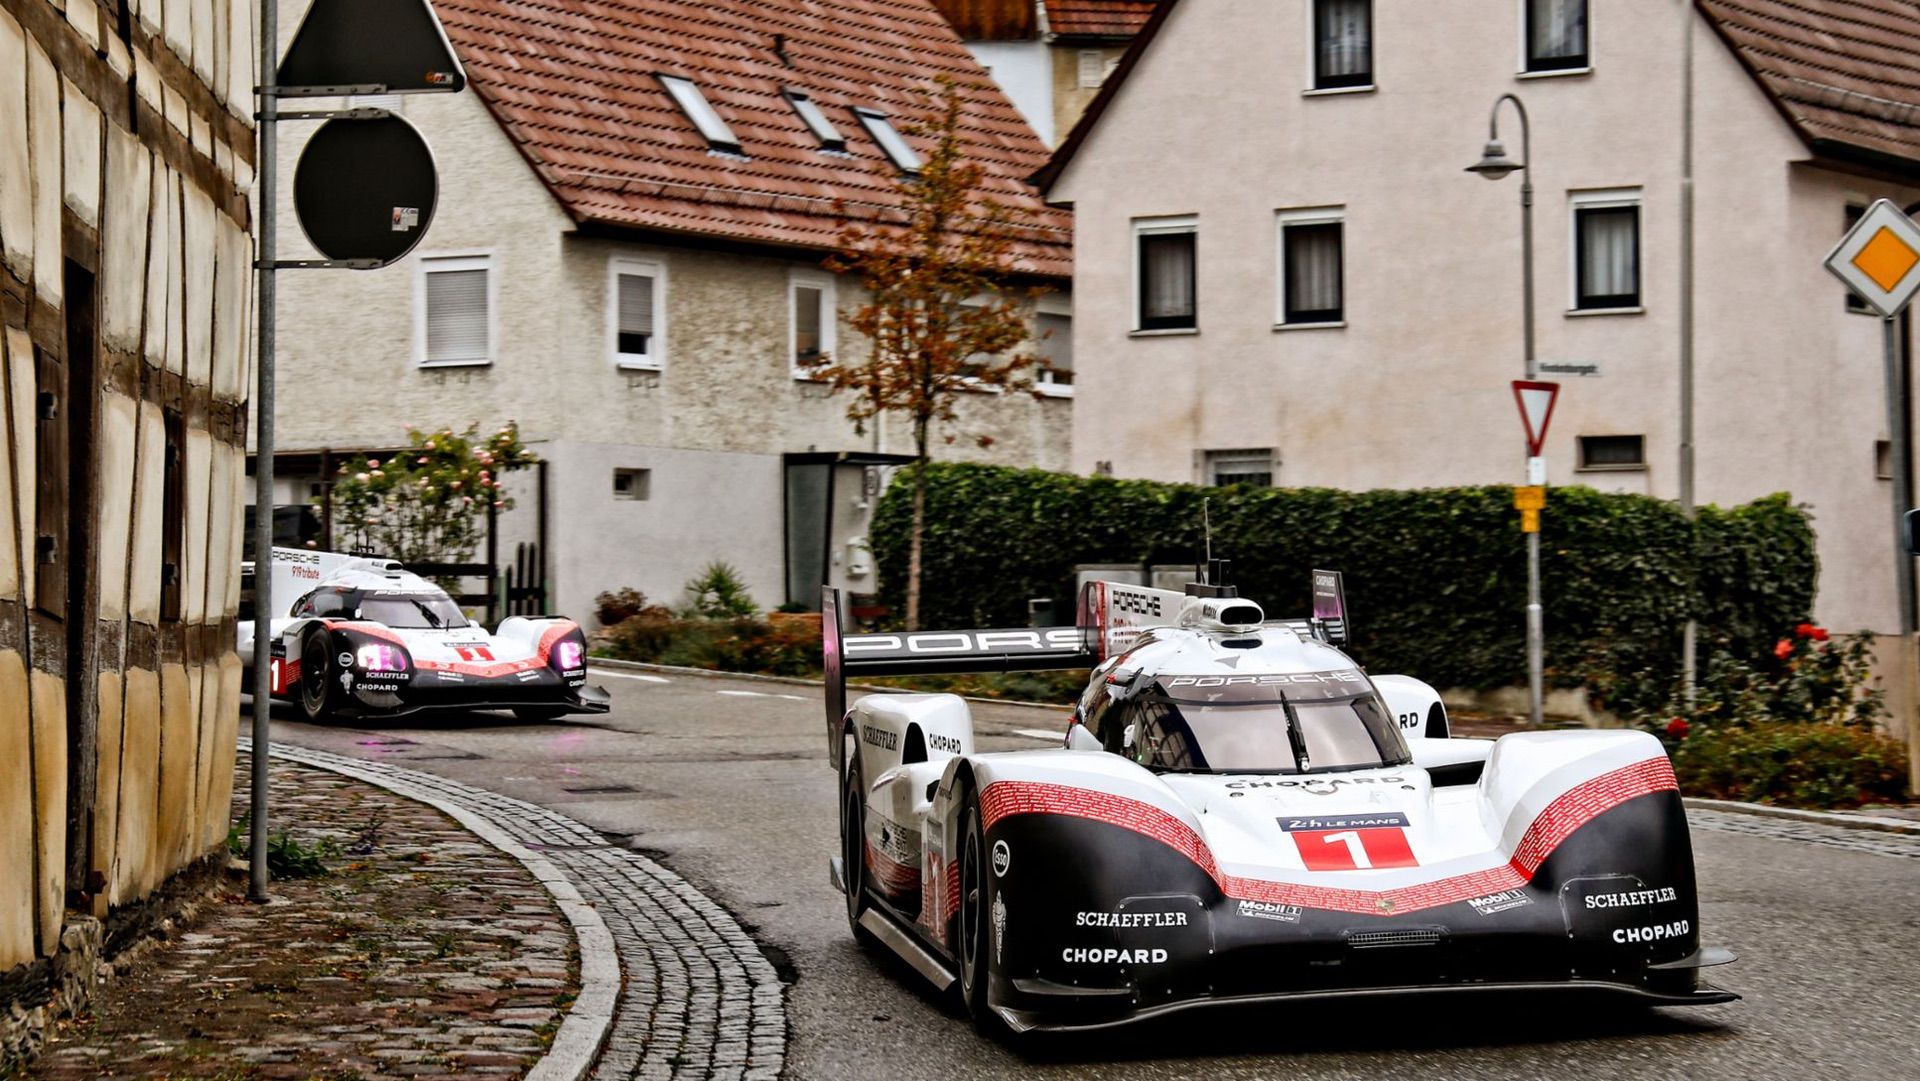 Porsche promotional image of the 919 LMP1h race car in a sleepy village